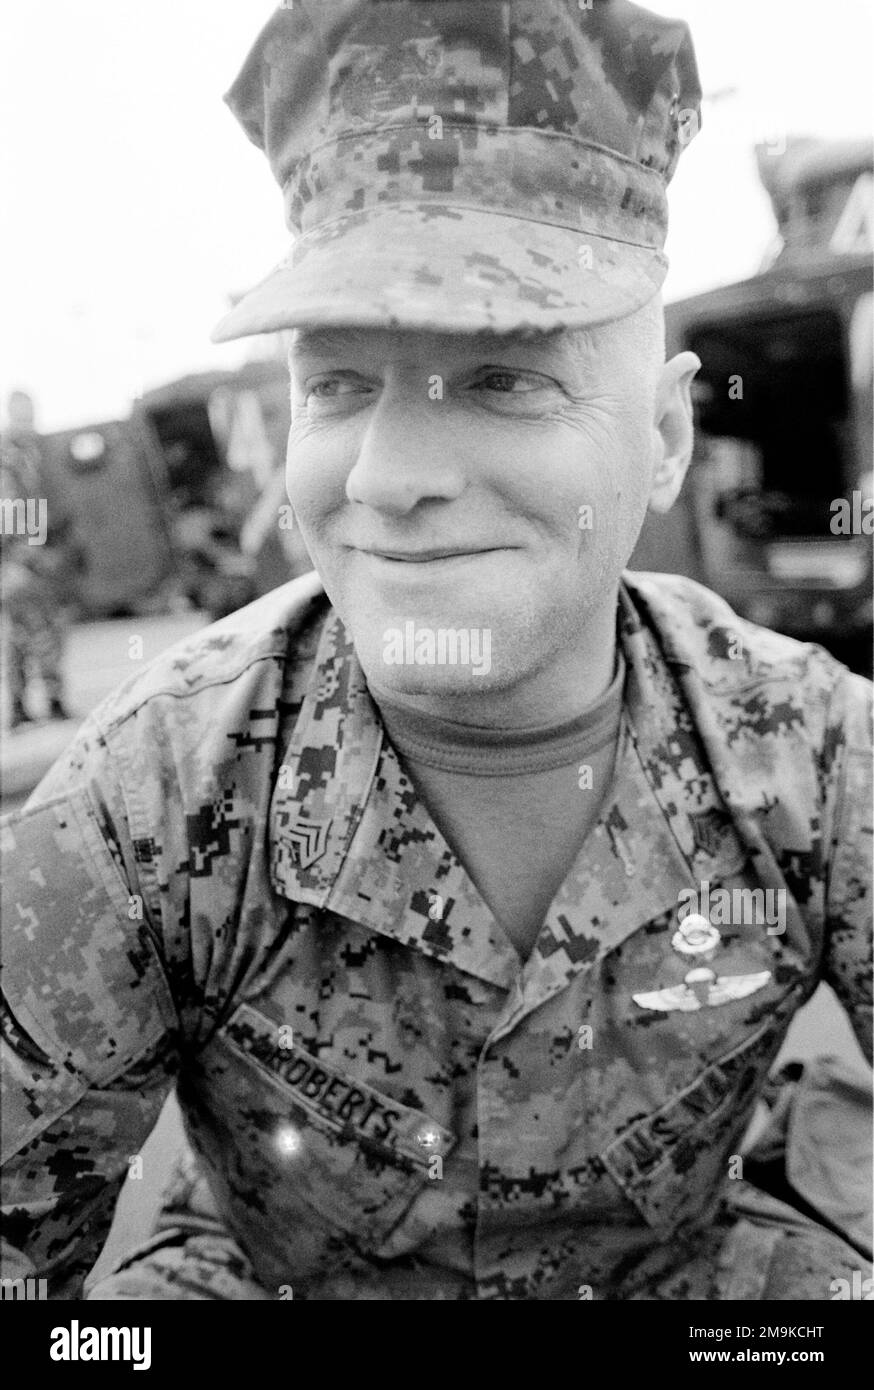 US Marine Corps Reserve (USMCR) Sergeant (SGT) Roberts, assigned to A/Company, 4th Light Armored Reconnaissance Battalion (LAR), poses for a photograph during mobilization activities at Camp Pendleton, California (CA), in preparation for deployment in support of Operation ENDURING FREEDOM. Subject Operation/Series: ENDURING FREEDOM Base: Marine Corps Base Camp Pendleton State: California (CA) Country: United States Of America (USA) Stock Photo